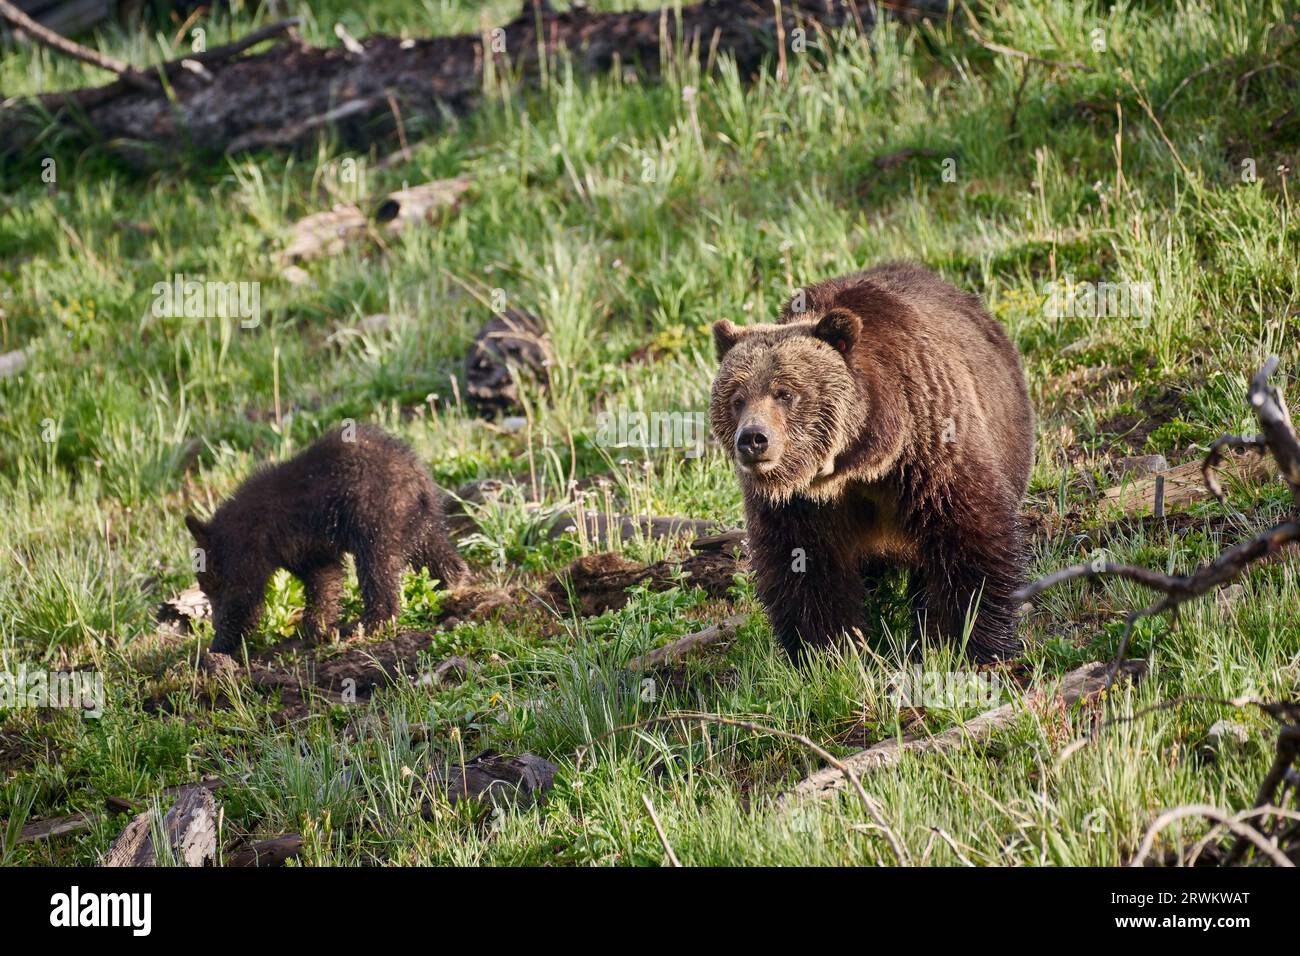 Grizzly bear sow with cubs, Ursus arctos horribilis, Yellowstone National Park, Wyoming, United States of America Stock Photo